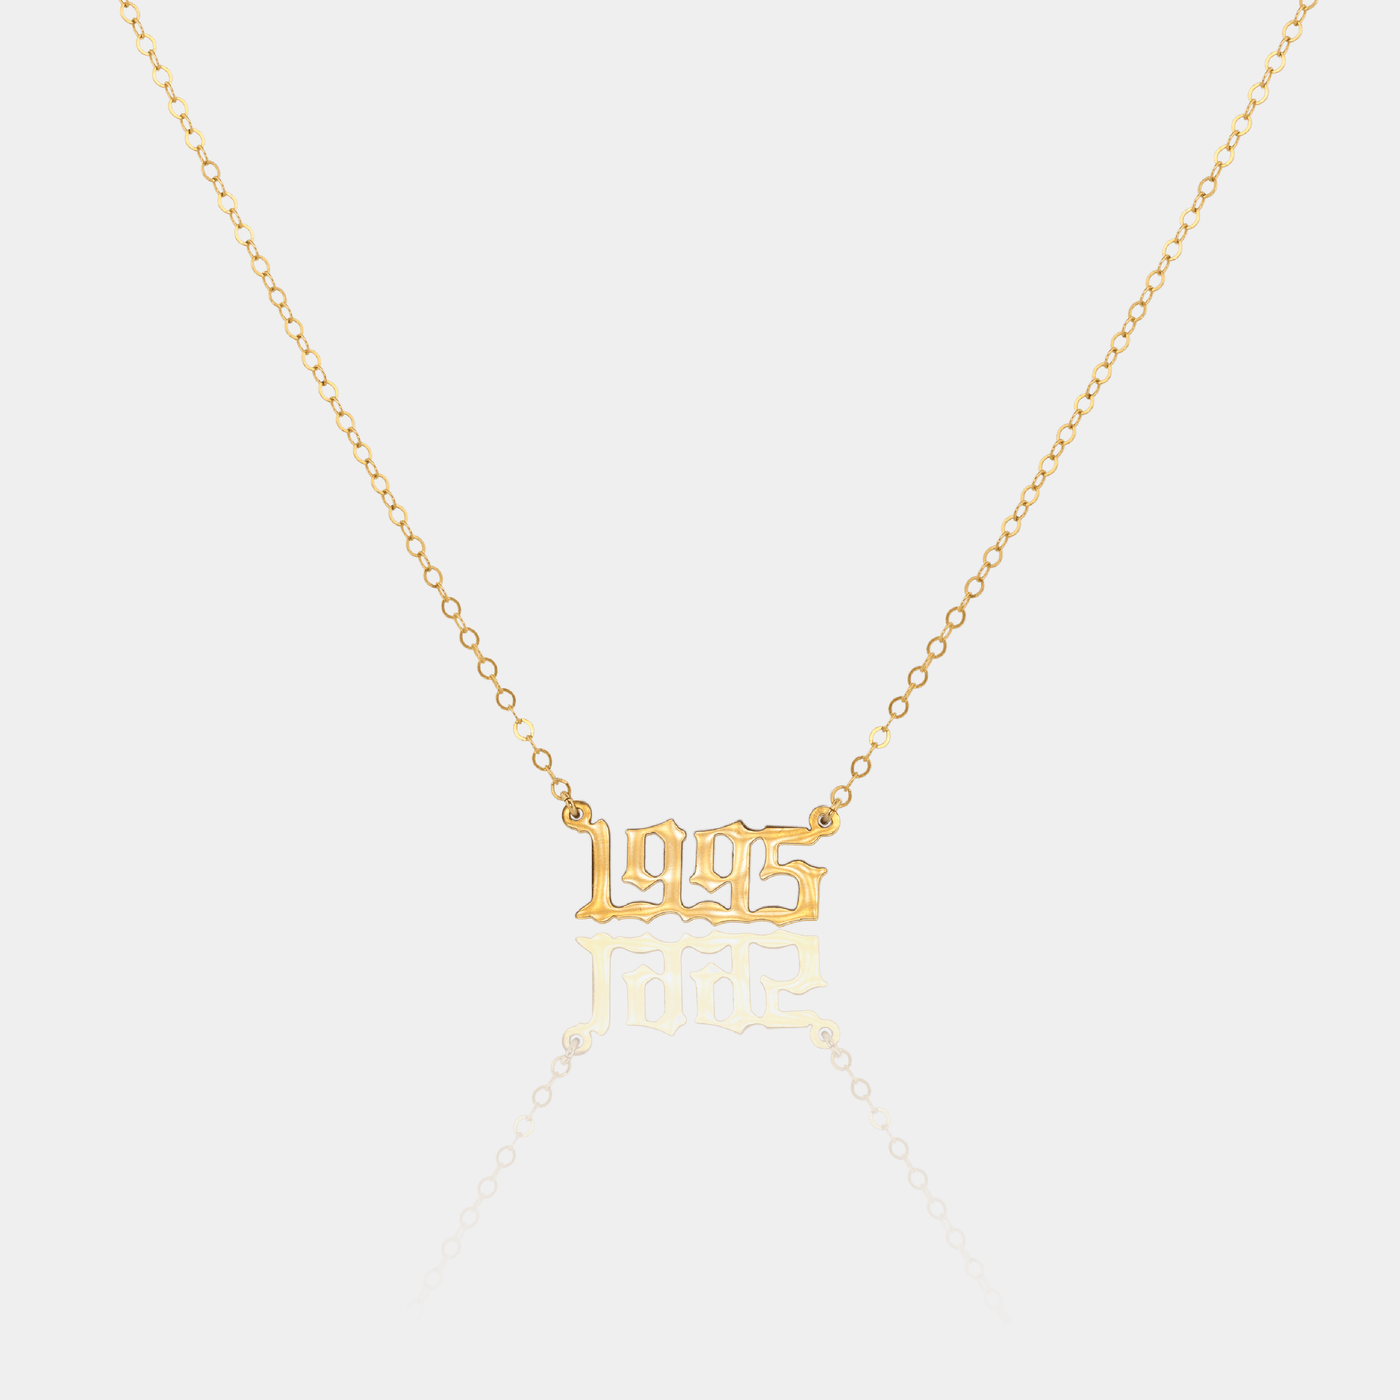 14K Gold Filled Necklaces Birth Year Necklace LINK'D THE LABEL